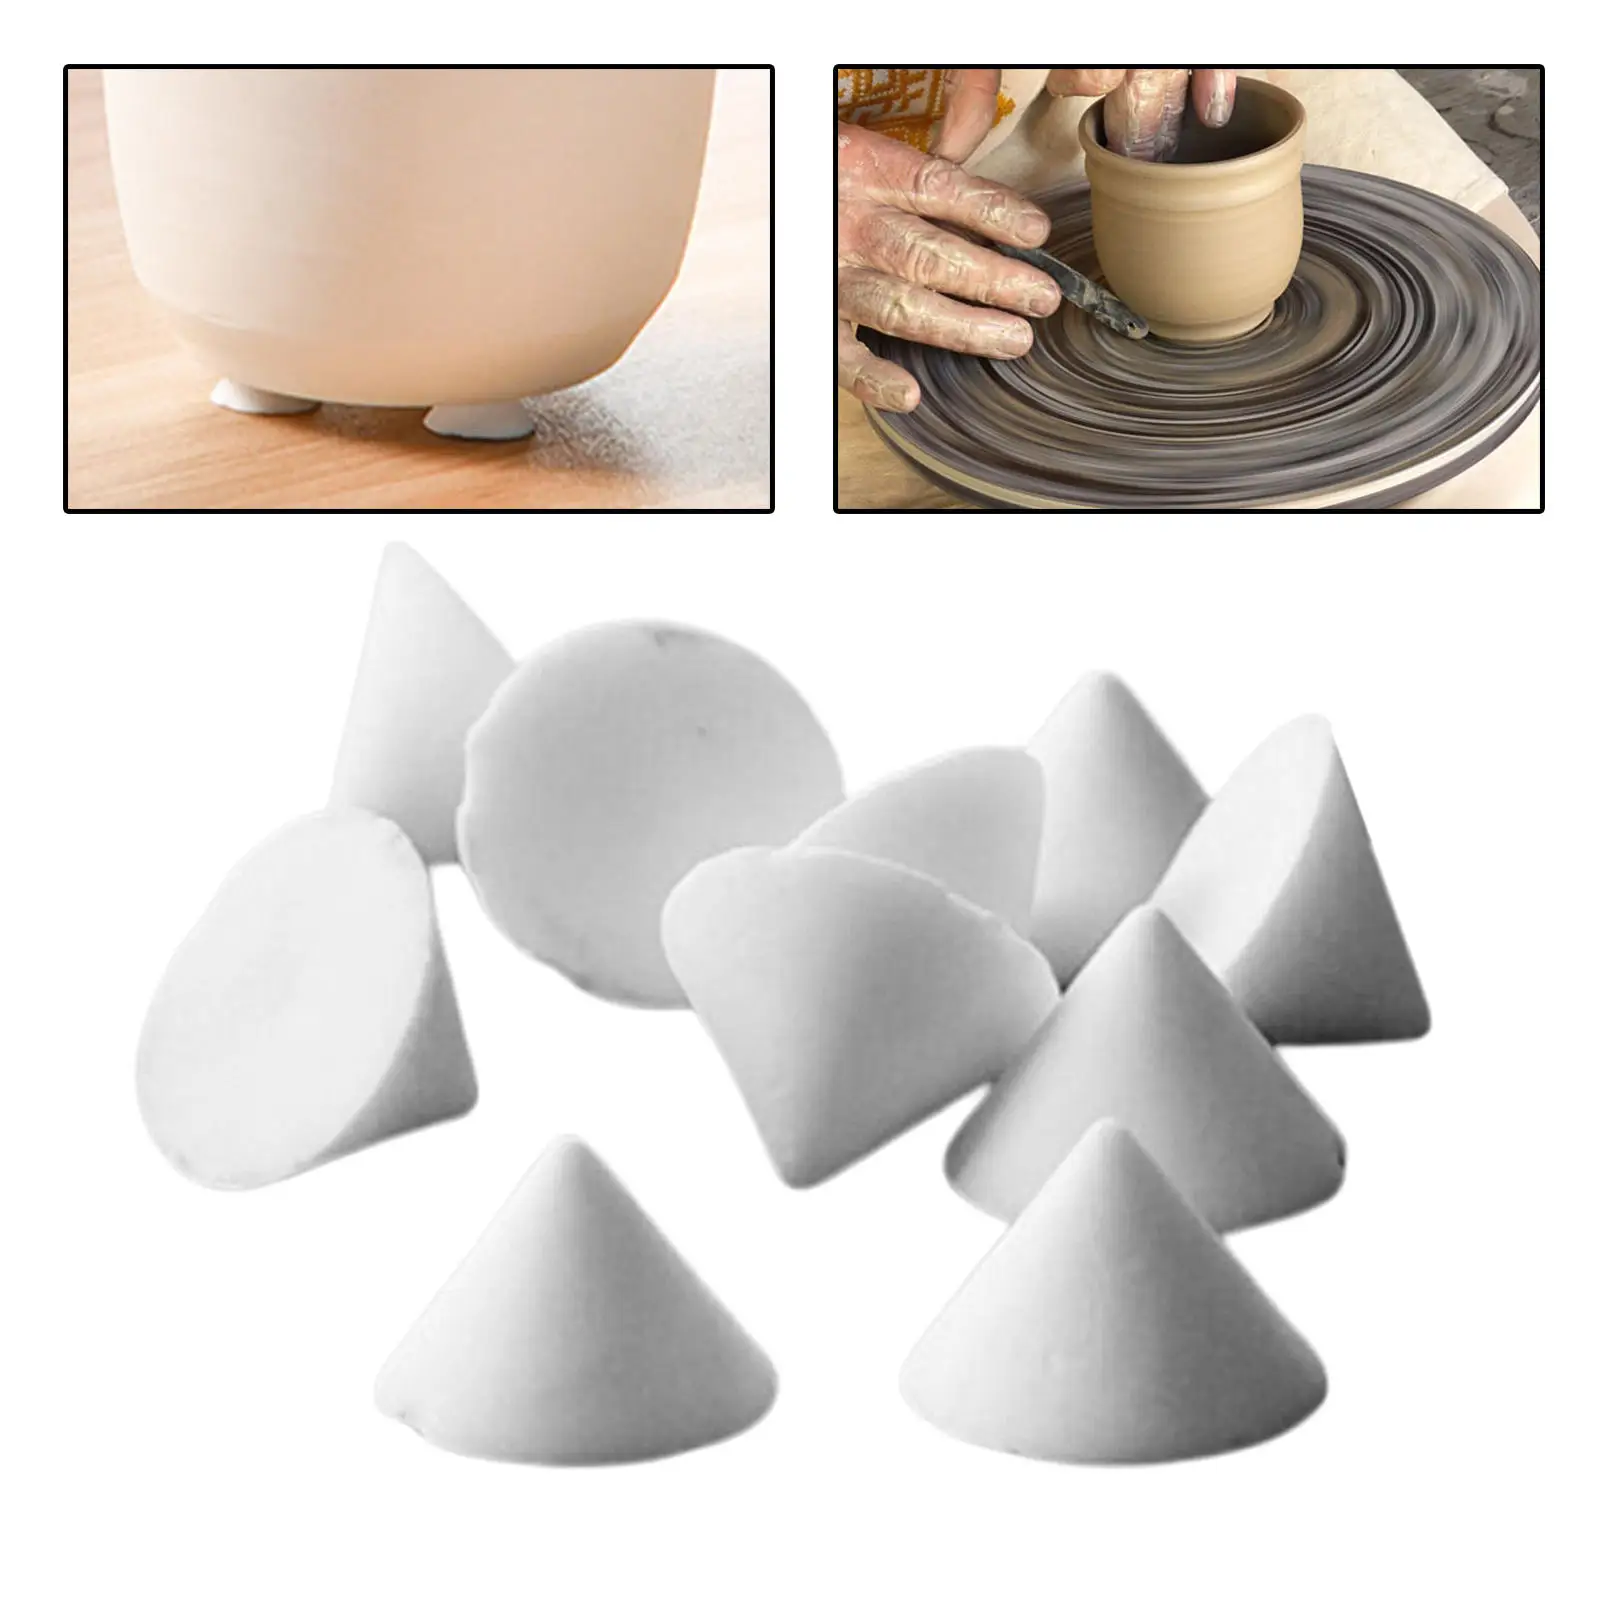 10pcs/set Moveable Nails Ceramic Refractory Support Nails High Temperature Resistant Material Pottery Tools Kiln Tool